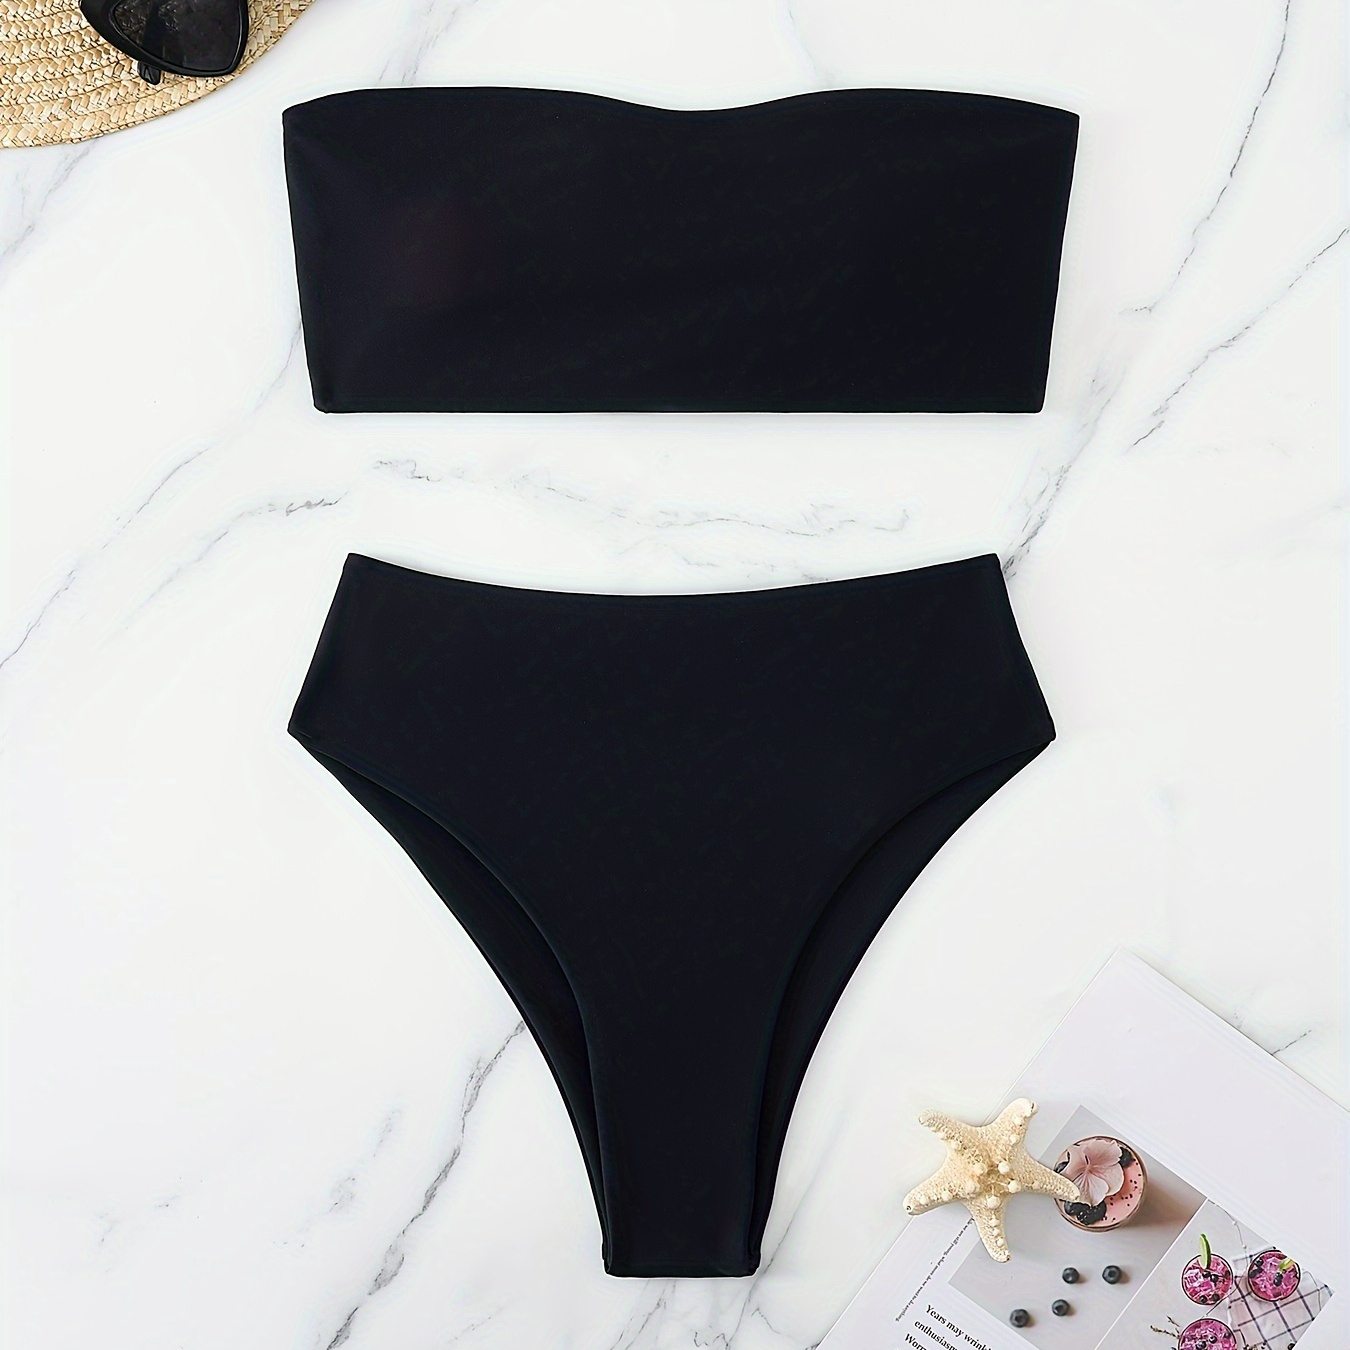 

Women's Multi-functional Tied Bikini Set - High Cut, Pure Black High Waisted Shorts, High Stretch Knit, Bra With Adjustable Details On The Back, Durable And Comfortable